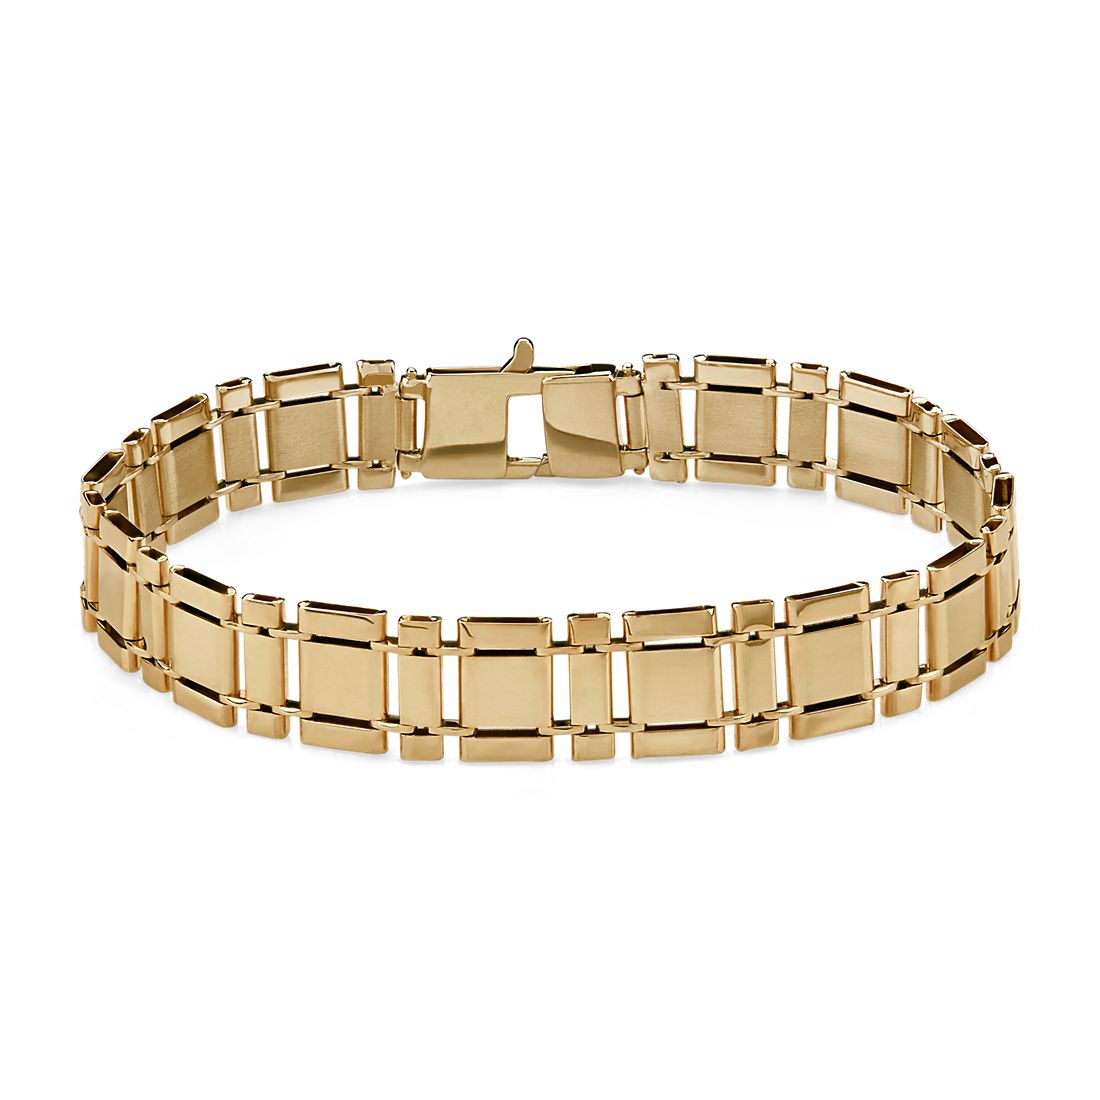 8" Men's Satin and Polished Link Bracelet in 14k Yellow Gold (7.5mm)